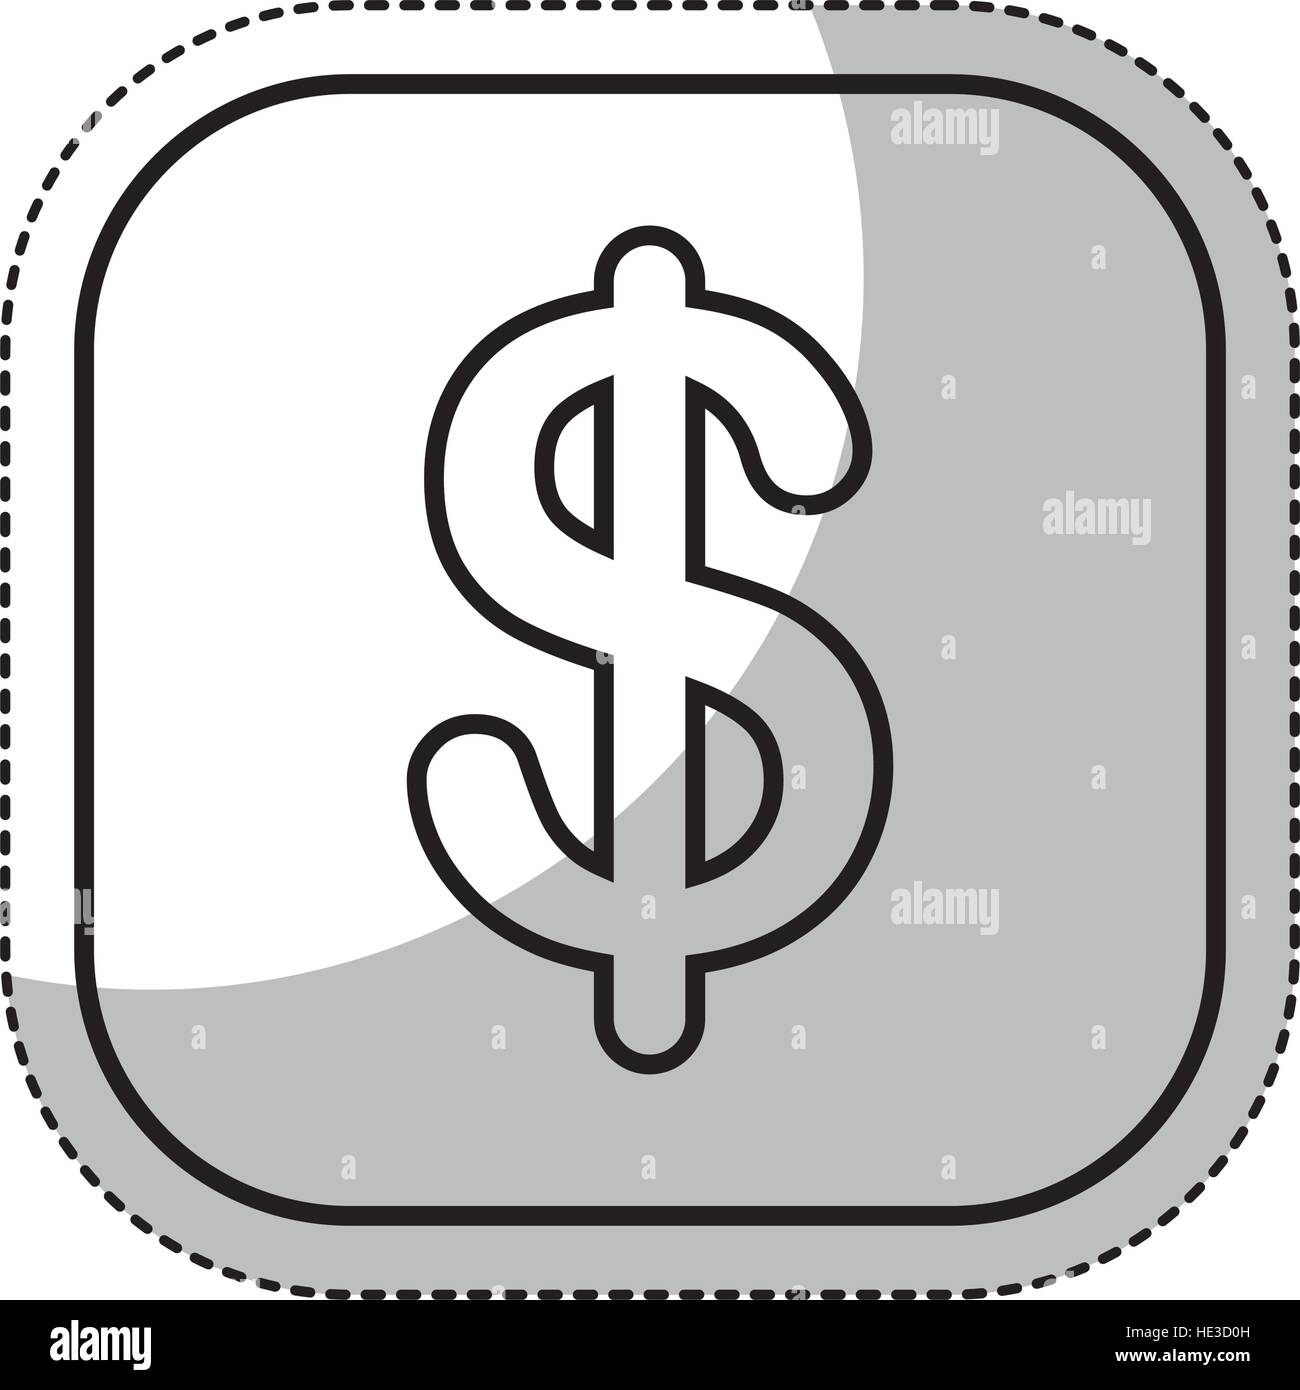 money symbol in button isolated icon vector illustration design Stock Vector